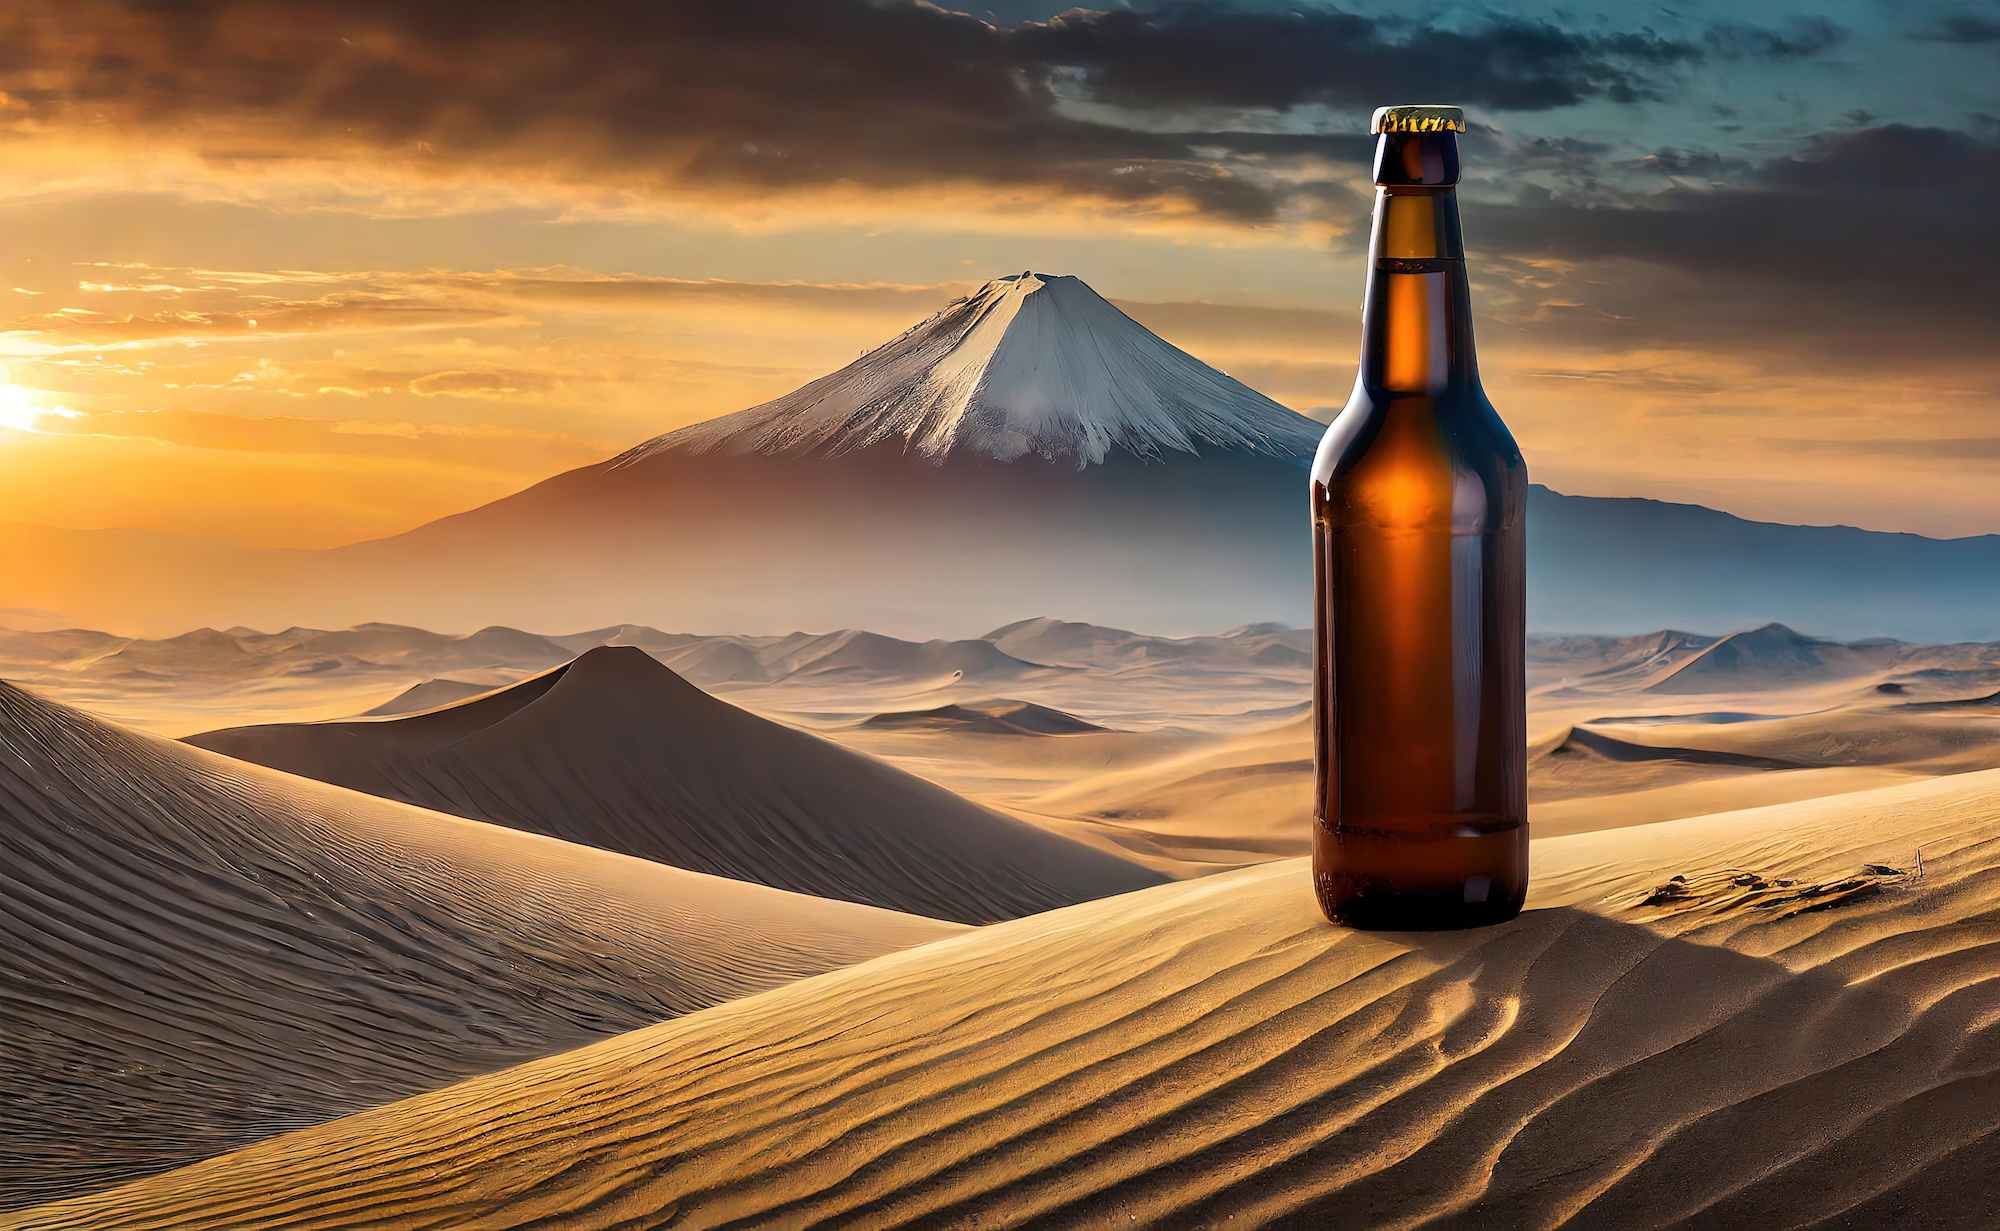 Glass beer bottle in the desert – beer bottle on the sand with no label (unlabeled) for product mockup template